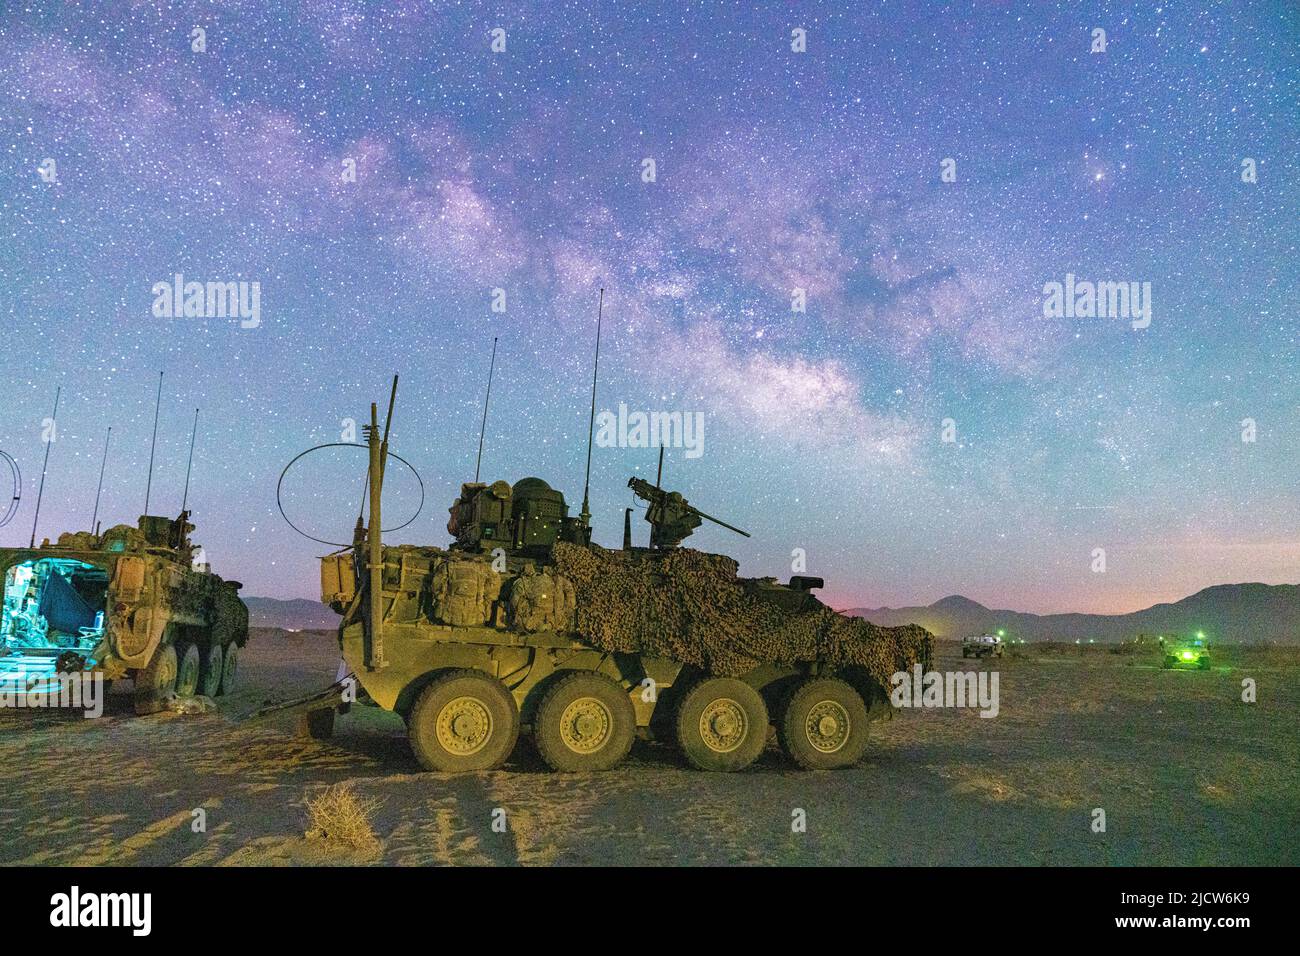 A U.S. Army Stryker assigned to Col. Kevin Bradley, commander of 3d Cavalry Regiment, is parked at a remote location of the National Training Center during a moonless, open sky where the milky way was visible May 24, 2022. Additionally, unmanned aircraft circled the vicinity to monitor for threats and intelligence from the sky. (U.S. Army photo by Staff Sgt. Christopher Stewart) Stock Photo